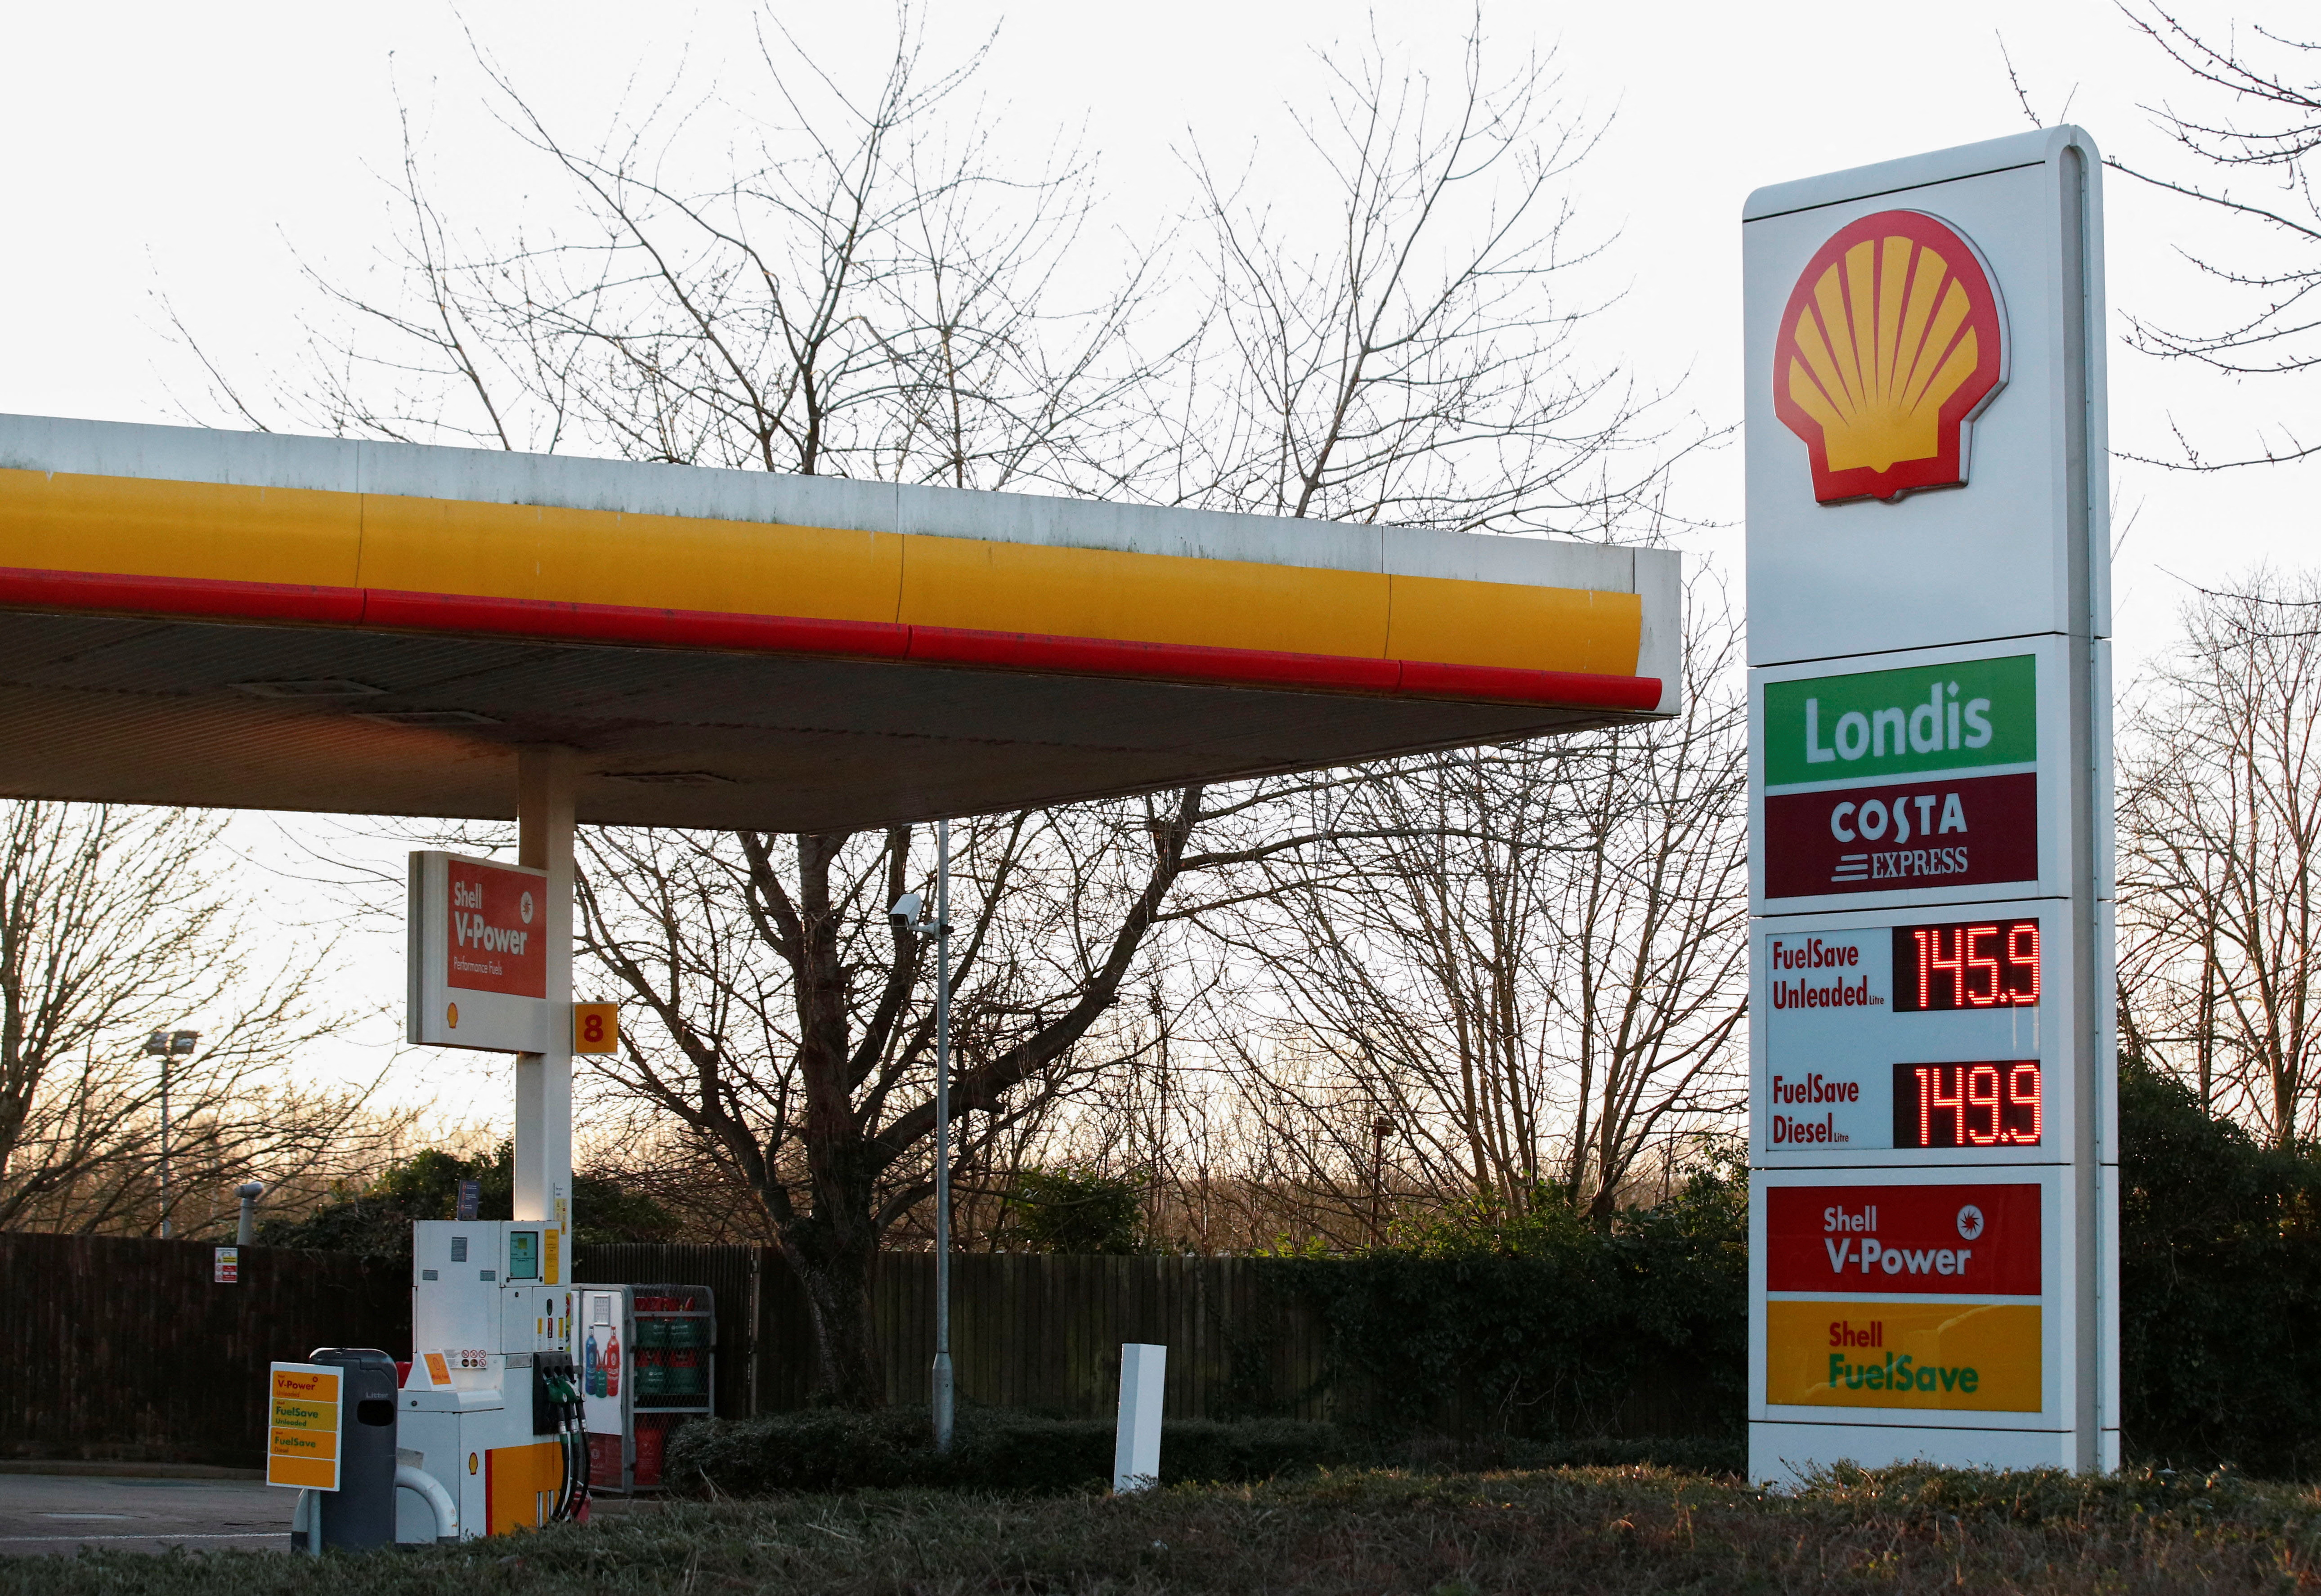 General view of a Shell petrol station